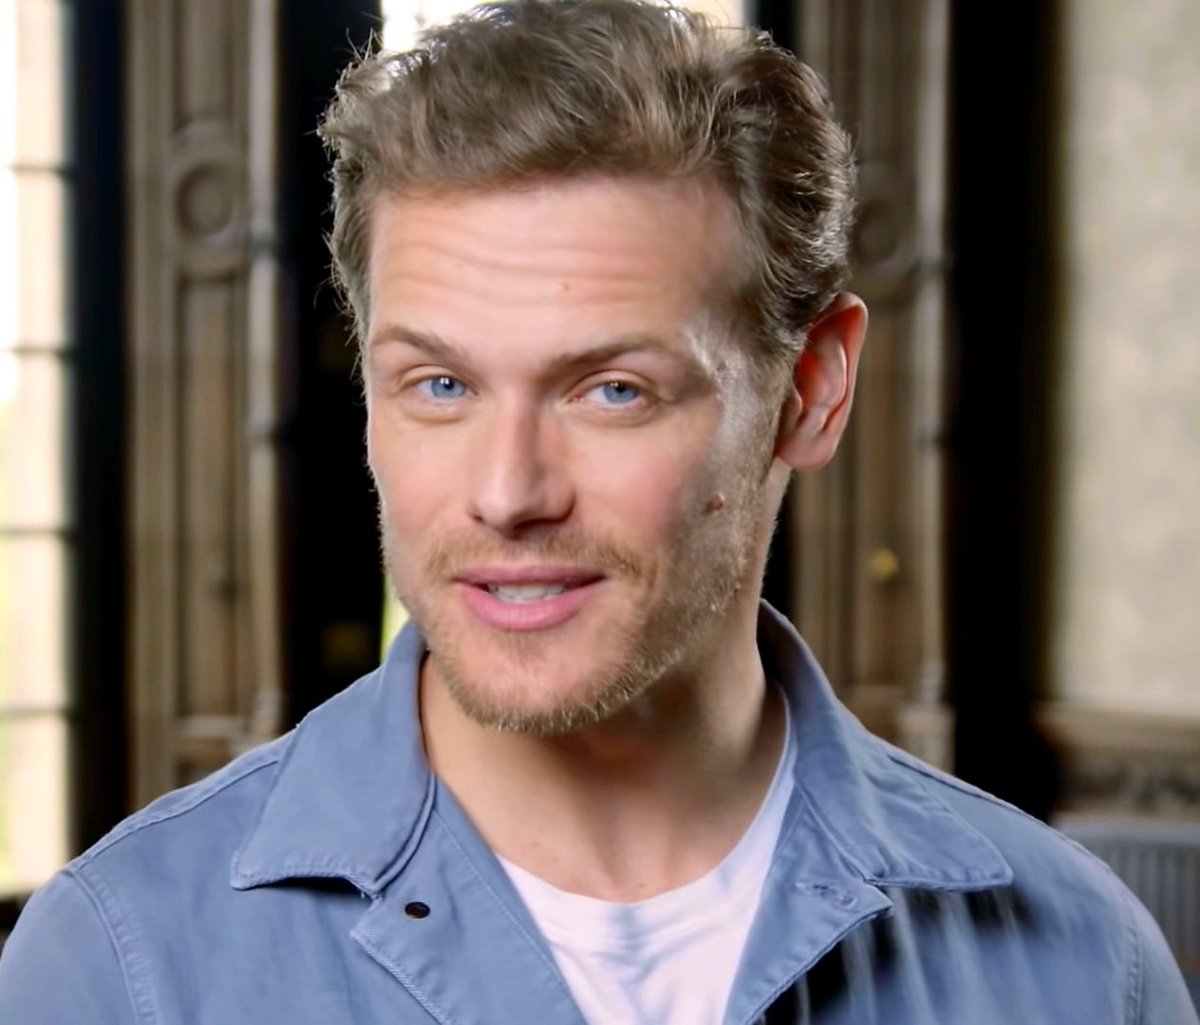 And those baby blues!! #SamHeughan